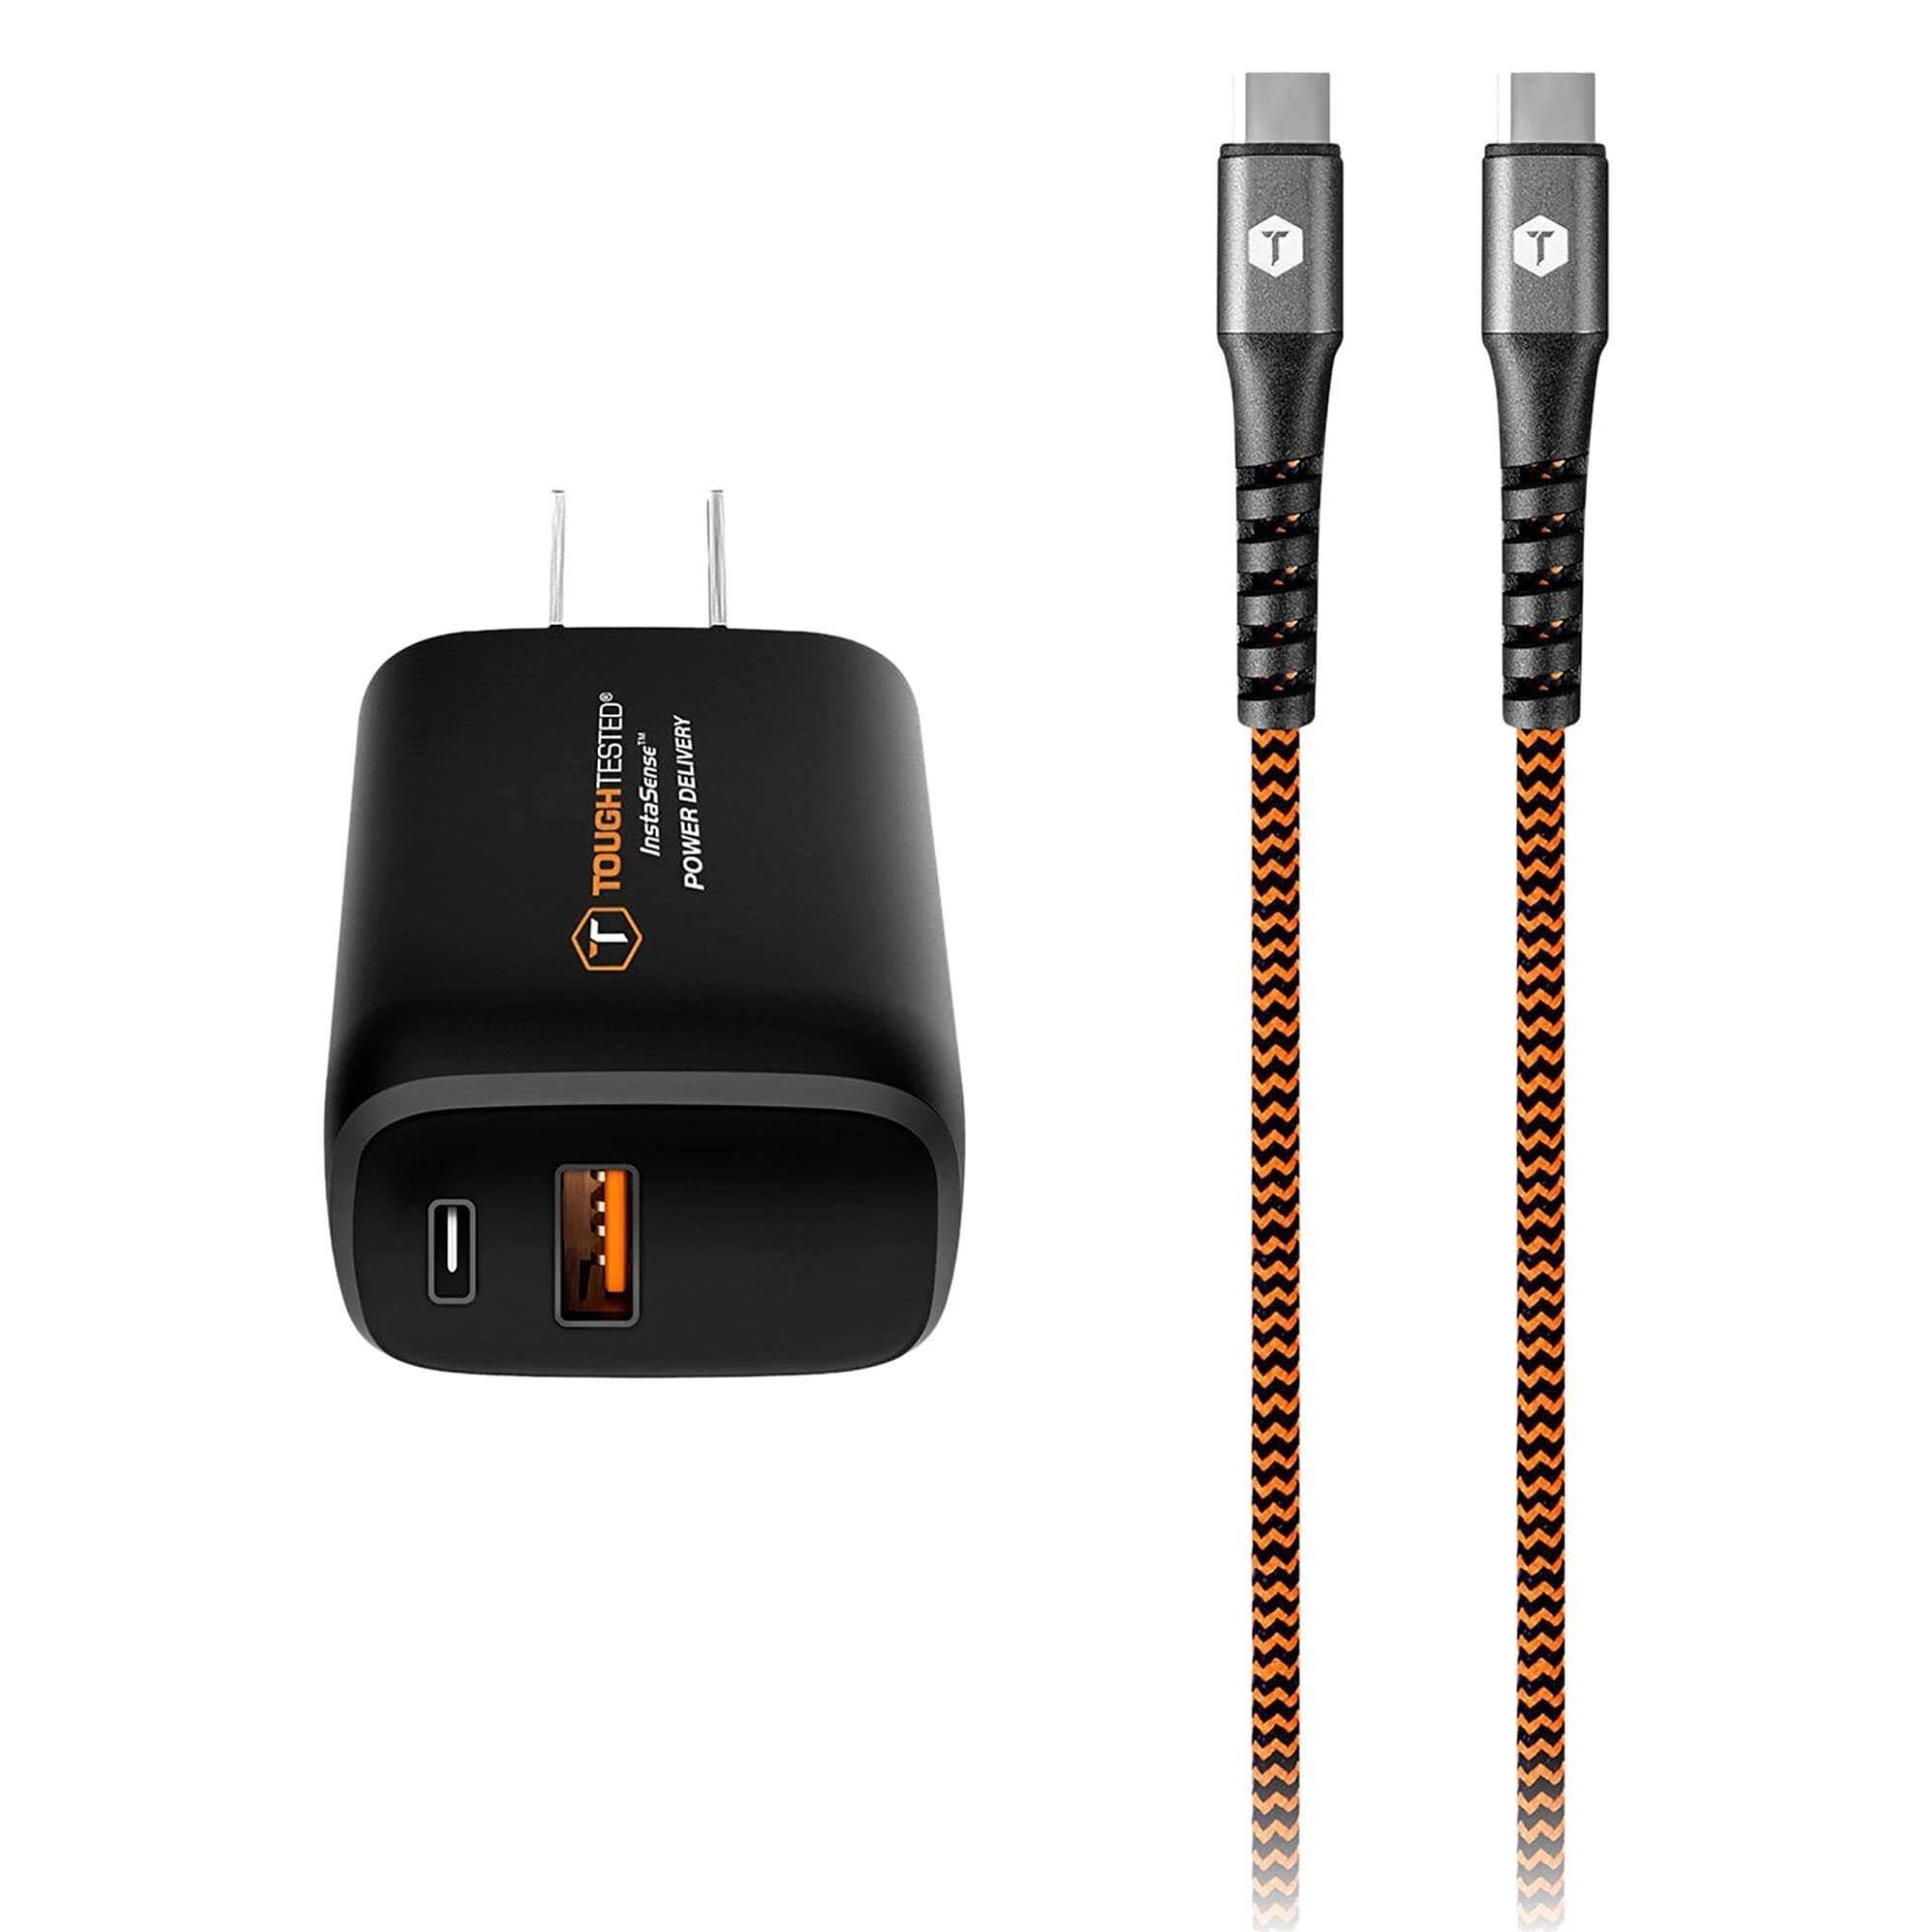 Tough-Tested Android Wall Charger Kit | Image